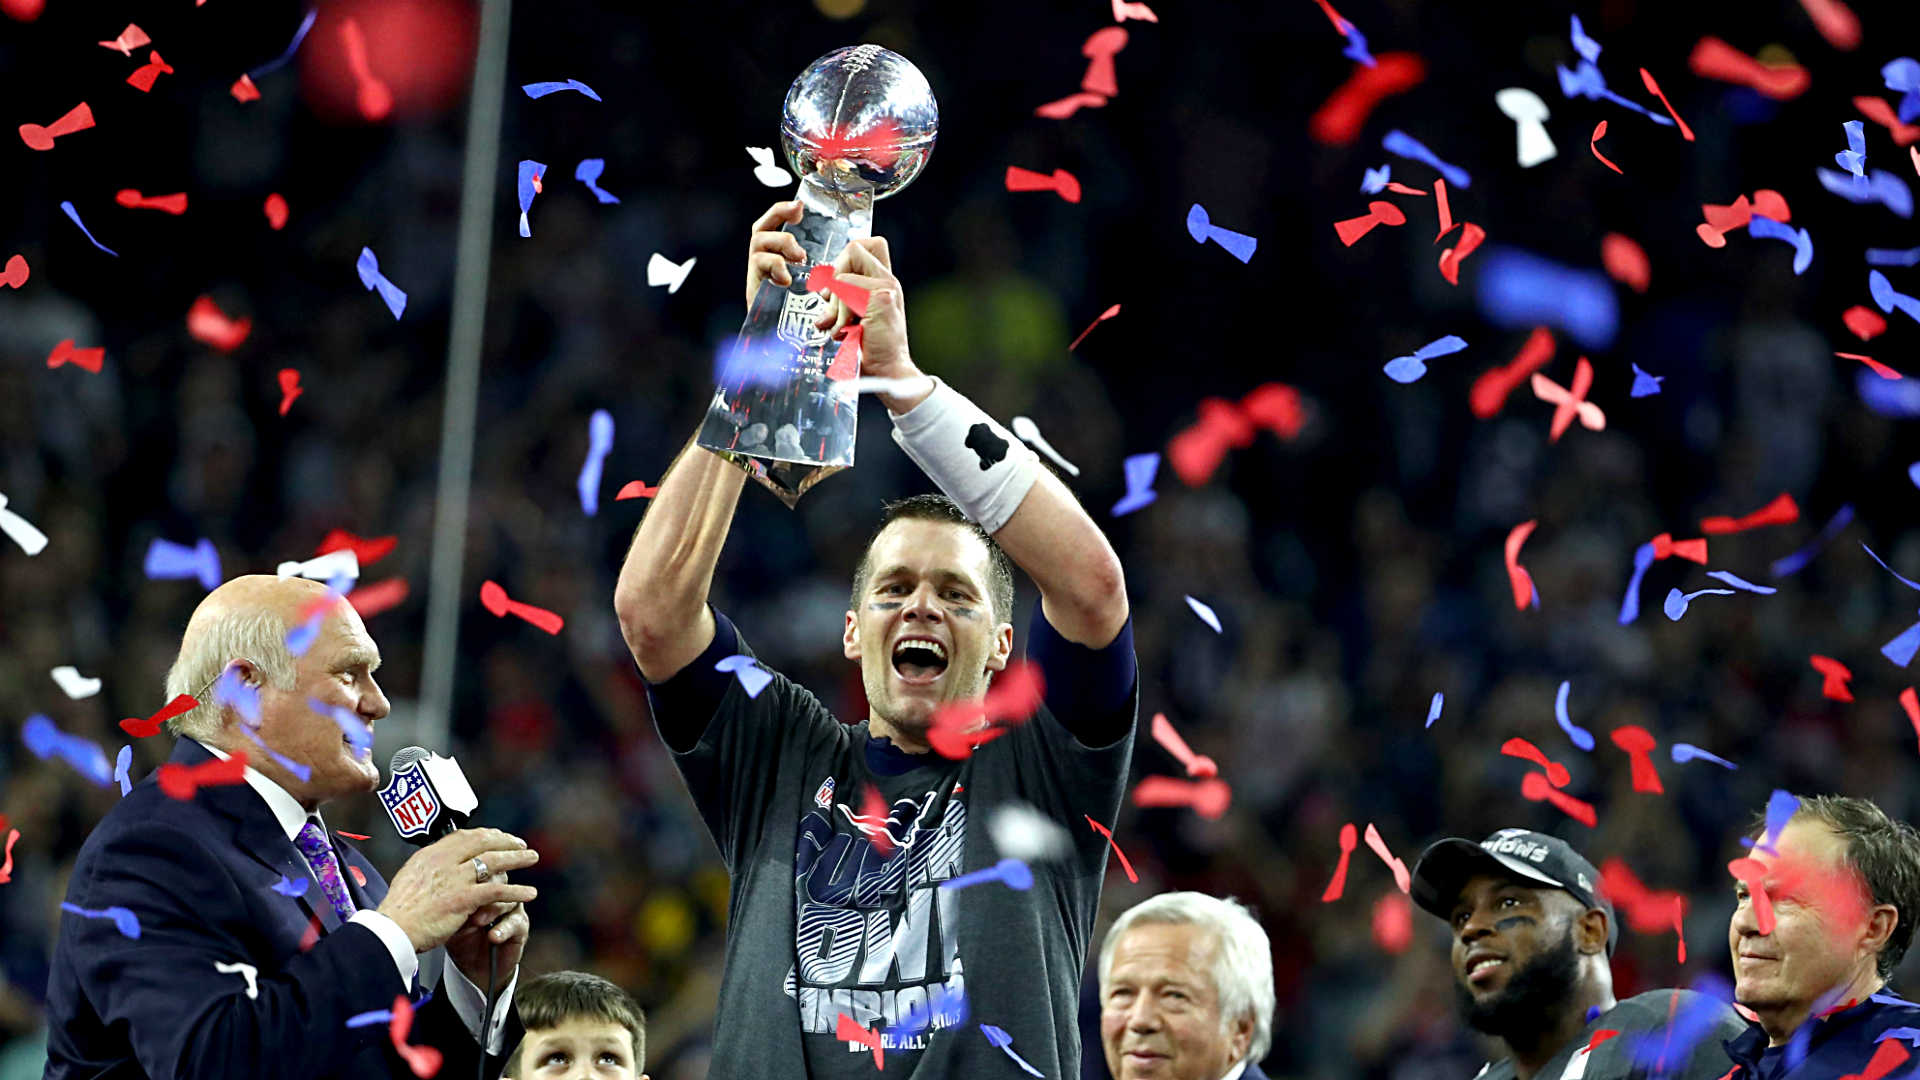 Super Bowl MVP winners: Who has won the award most in NFL history